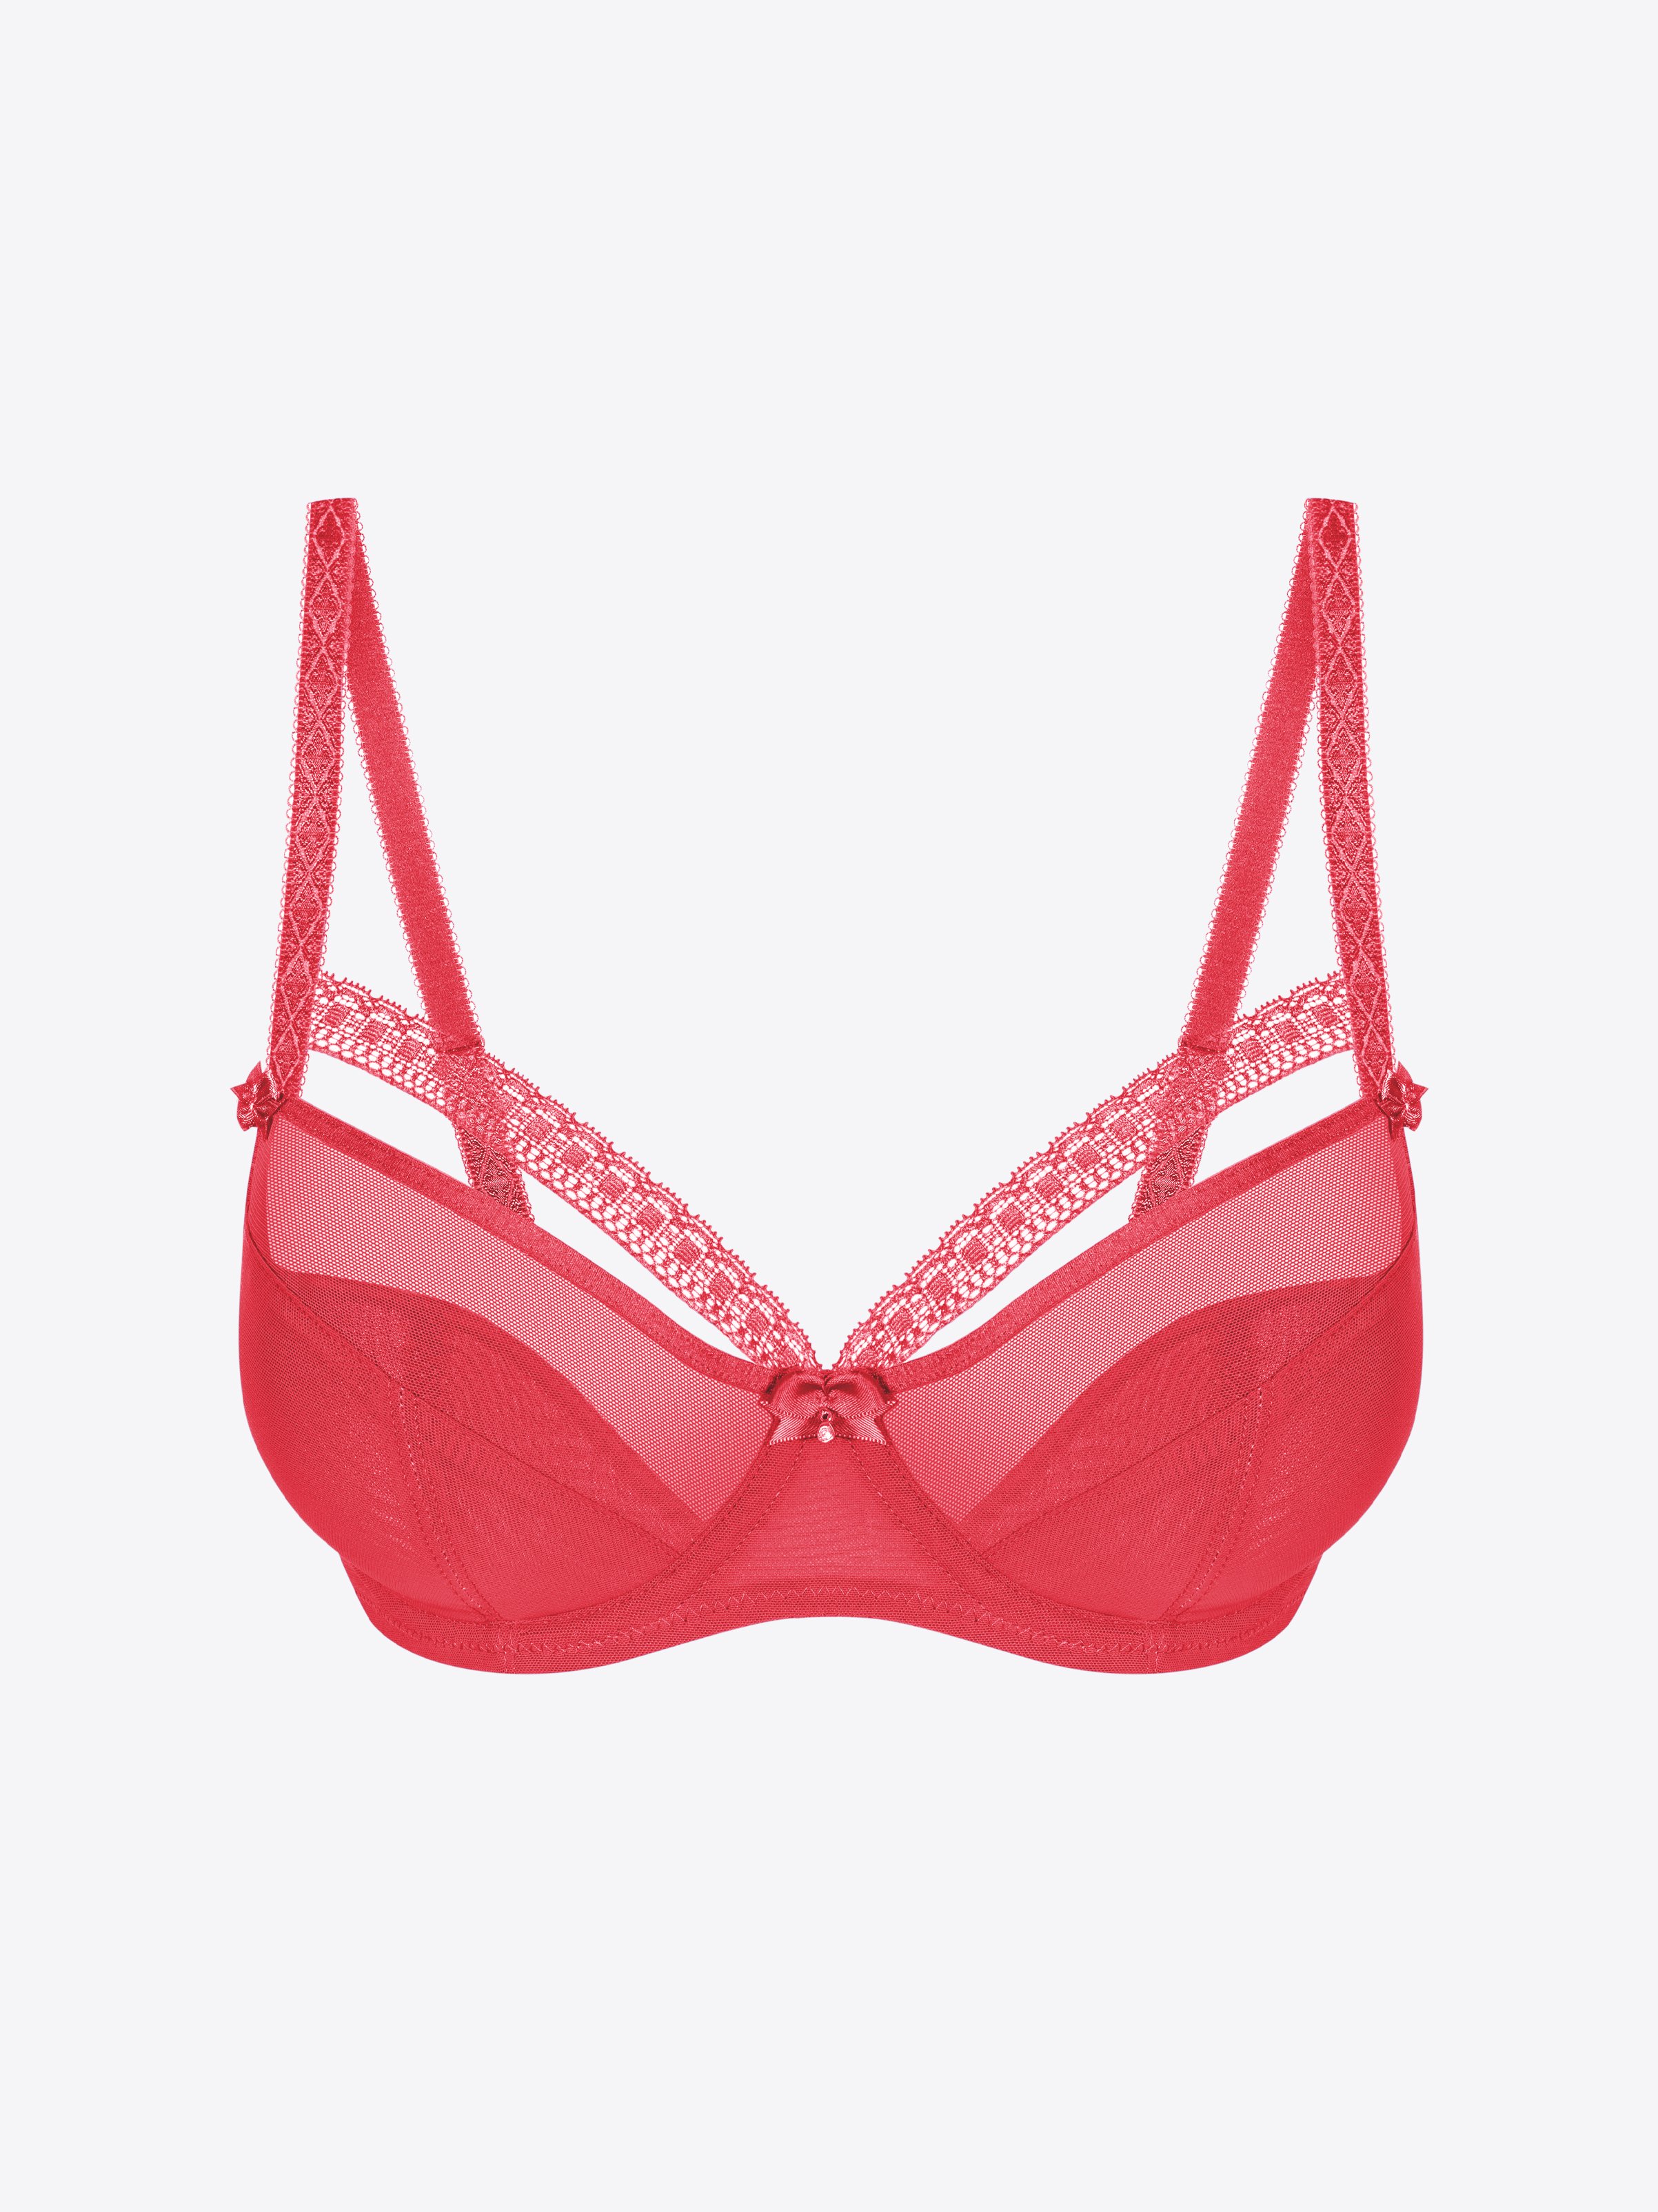 Joomie - Heavily Padded Push-Up Bra - Balconette - Seamless, Undrewired,  3/4th Coverage, Multiway Straps - T-Shirt Bra